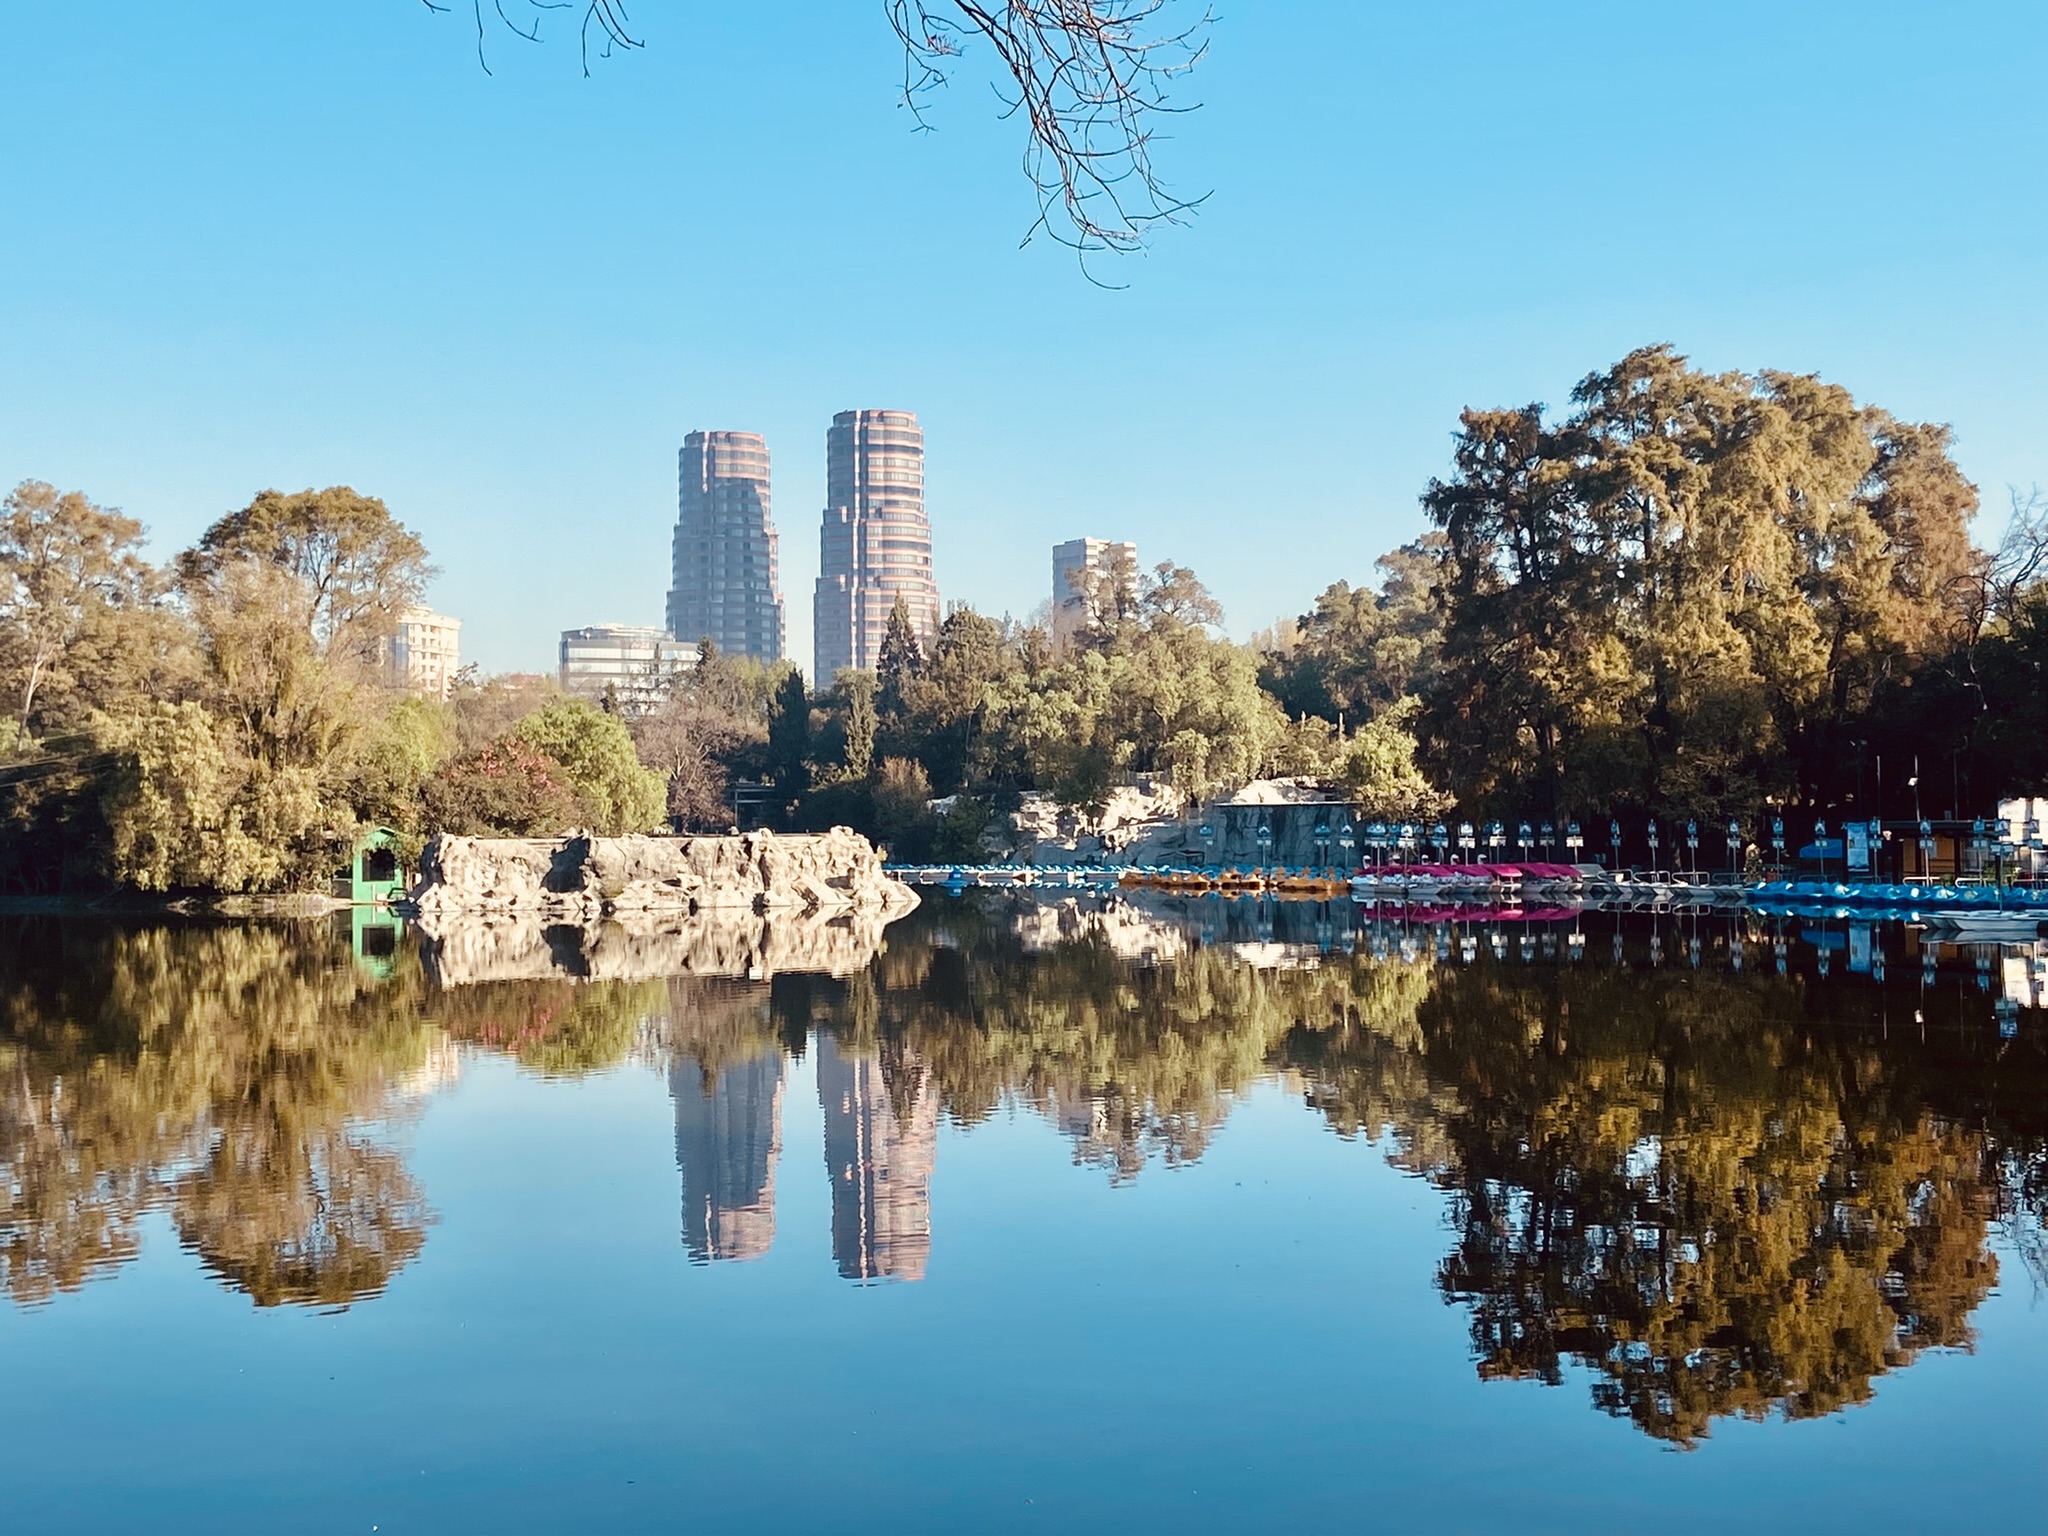 Reflections on a lake in Chapultepec park